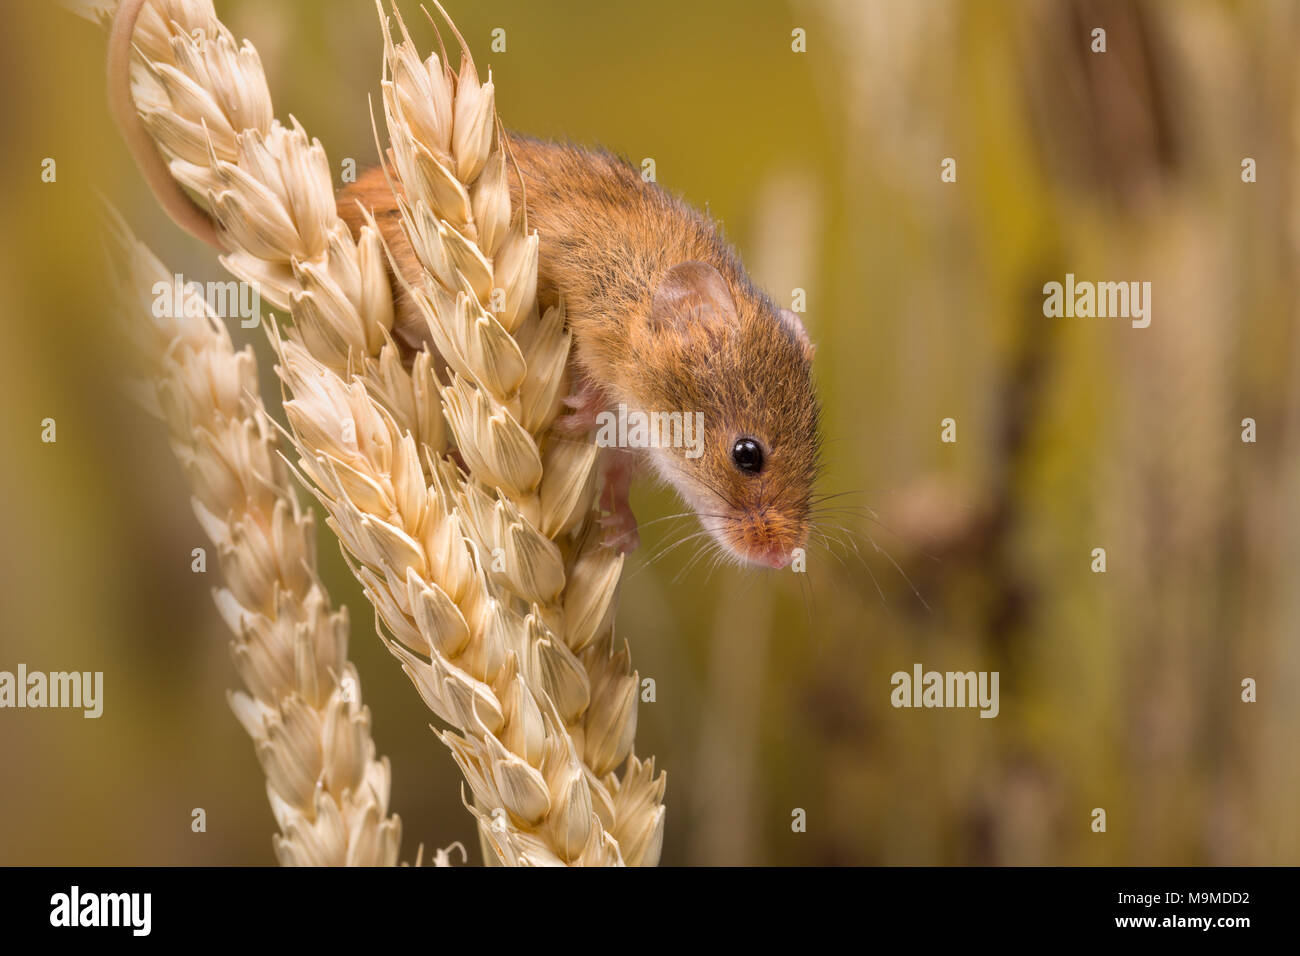 Micromys Minutus Or Harvest Mouse In Wheat Field Stock Photo Alamy